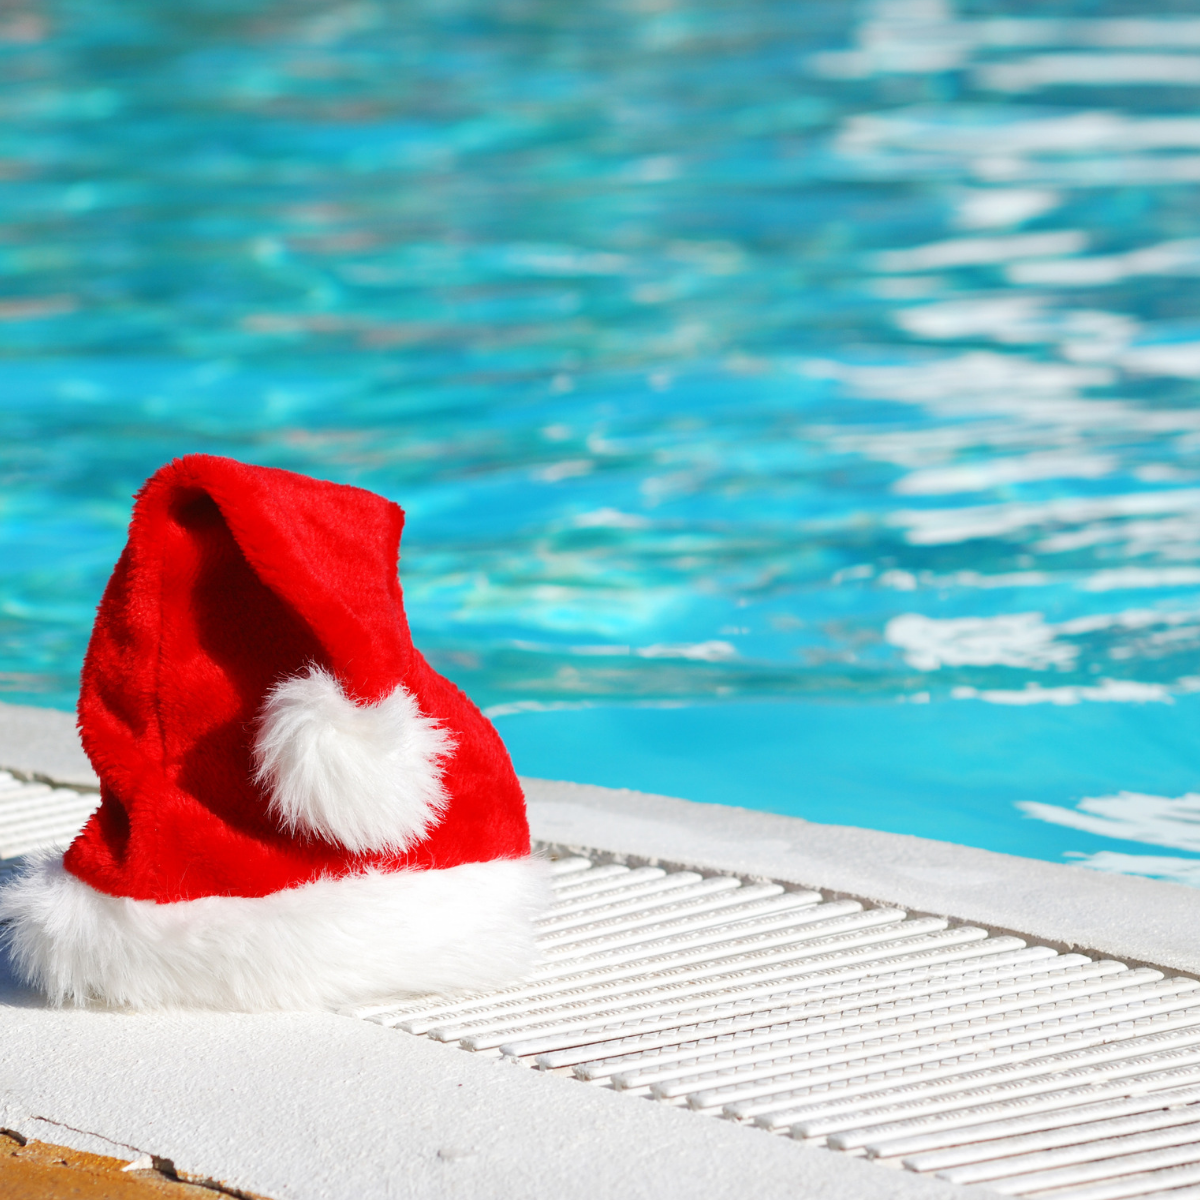 Tips For Handling The Extra Use of Your Pool Over Christmas